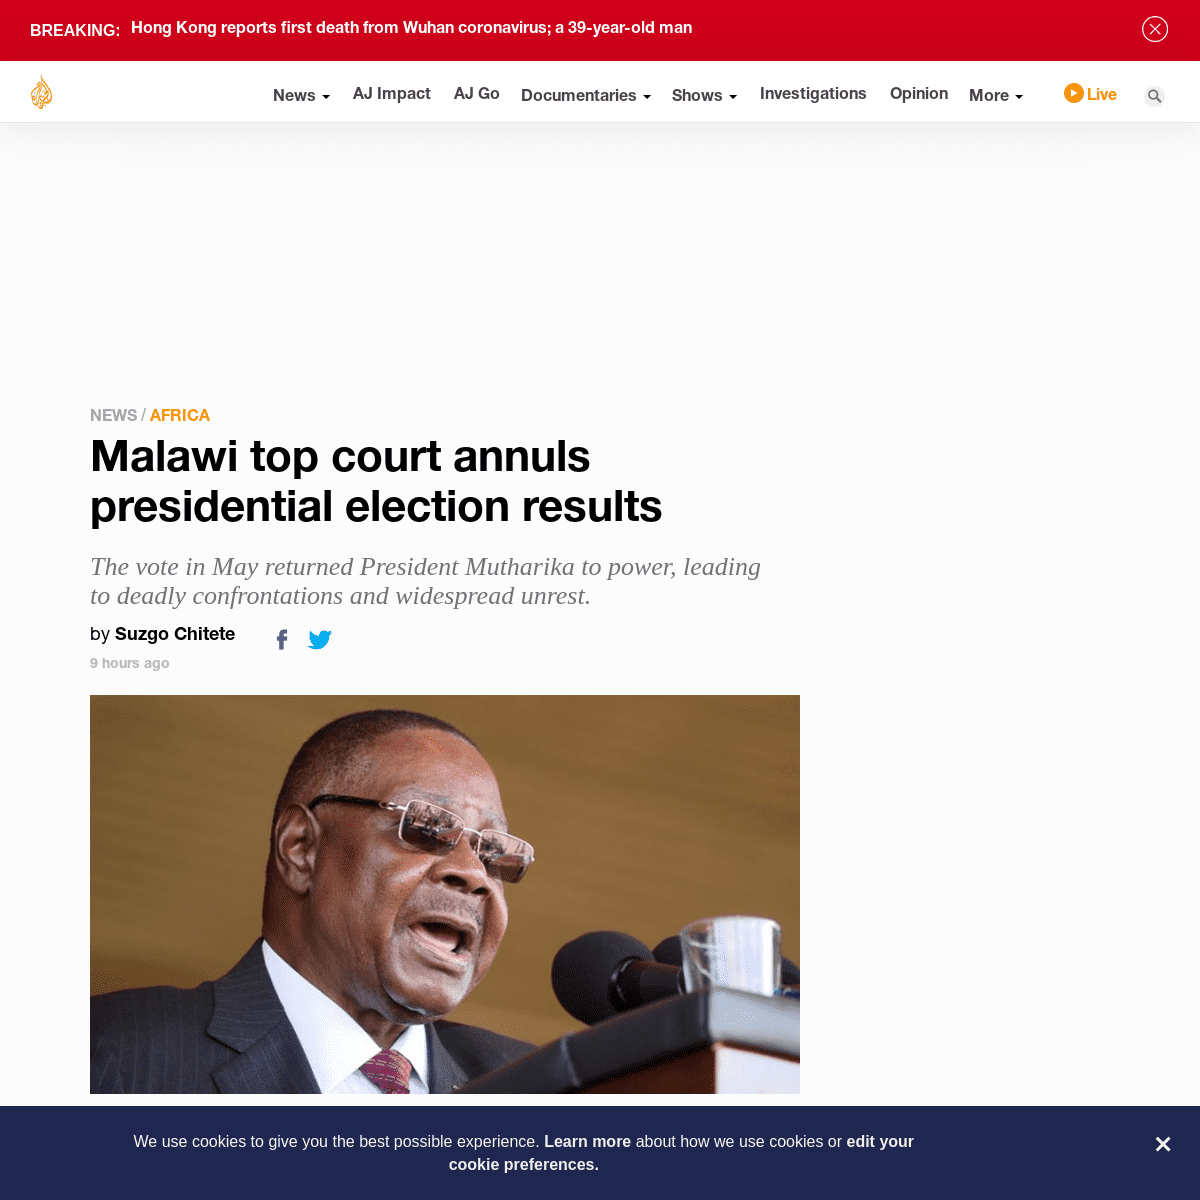 A complete backup of www.aljazeera.com/news/2020/02/malawi-top-court-annuls-presidential-election-results-200203060112731.html